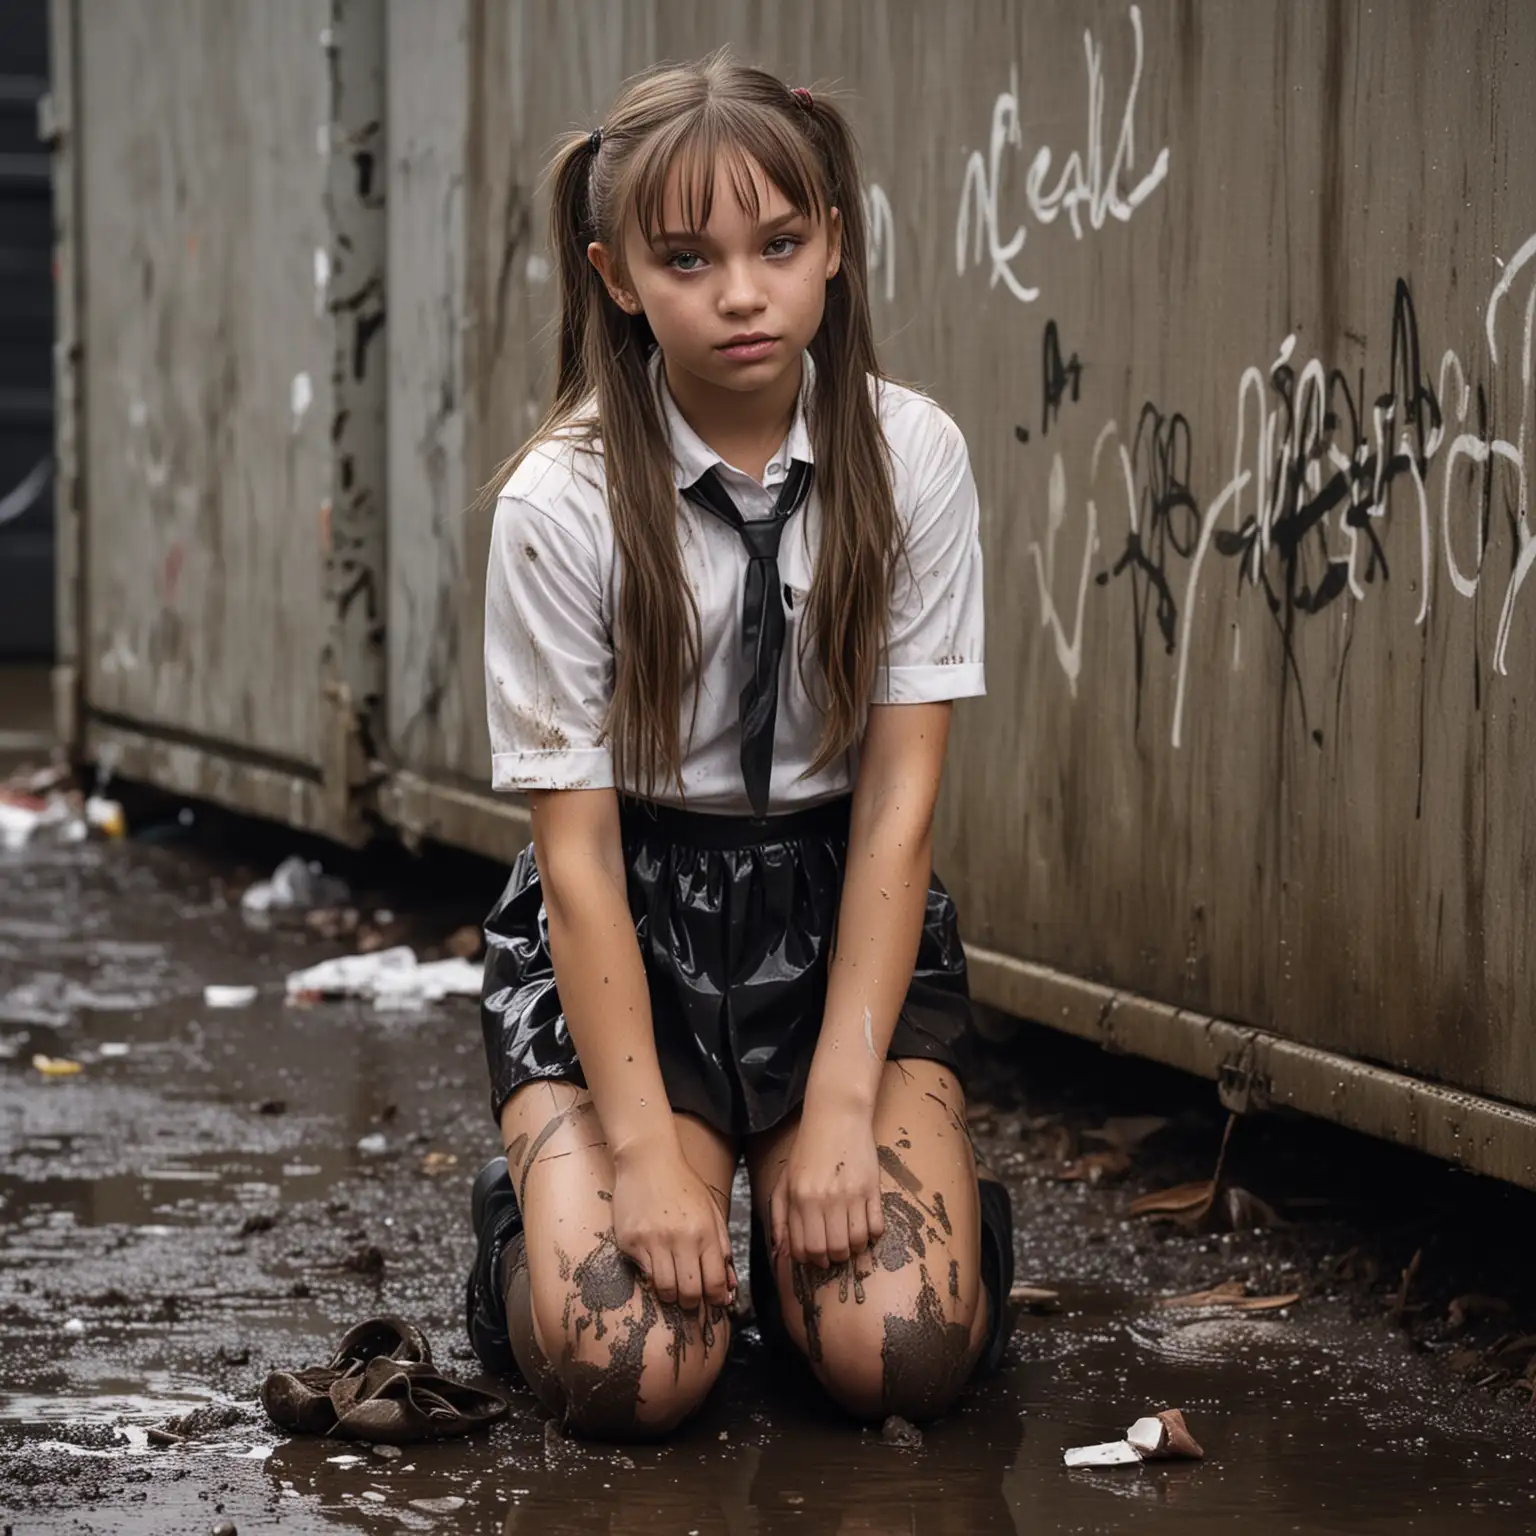 Night Portrait Young Maddie Ziegler as a Schoolgirl by a Dumpster